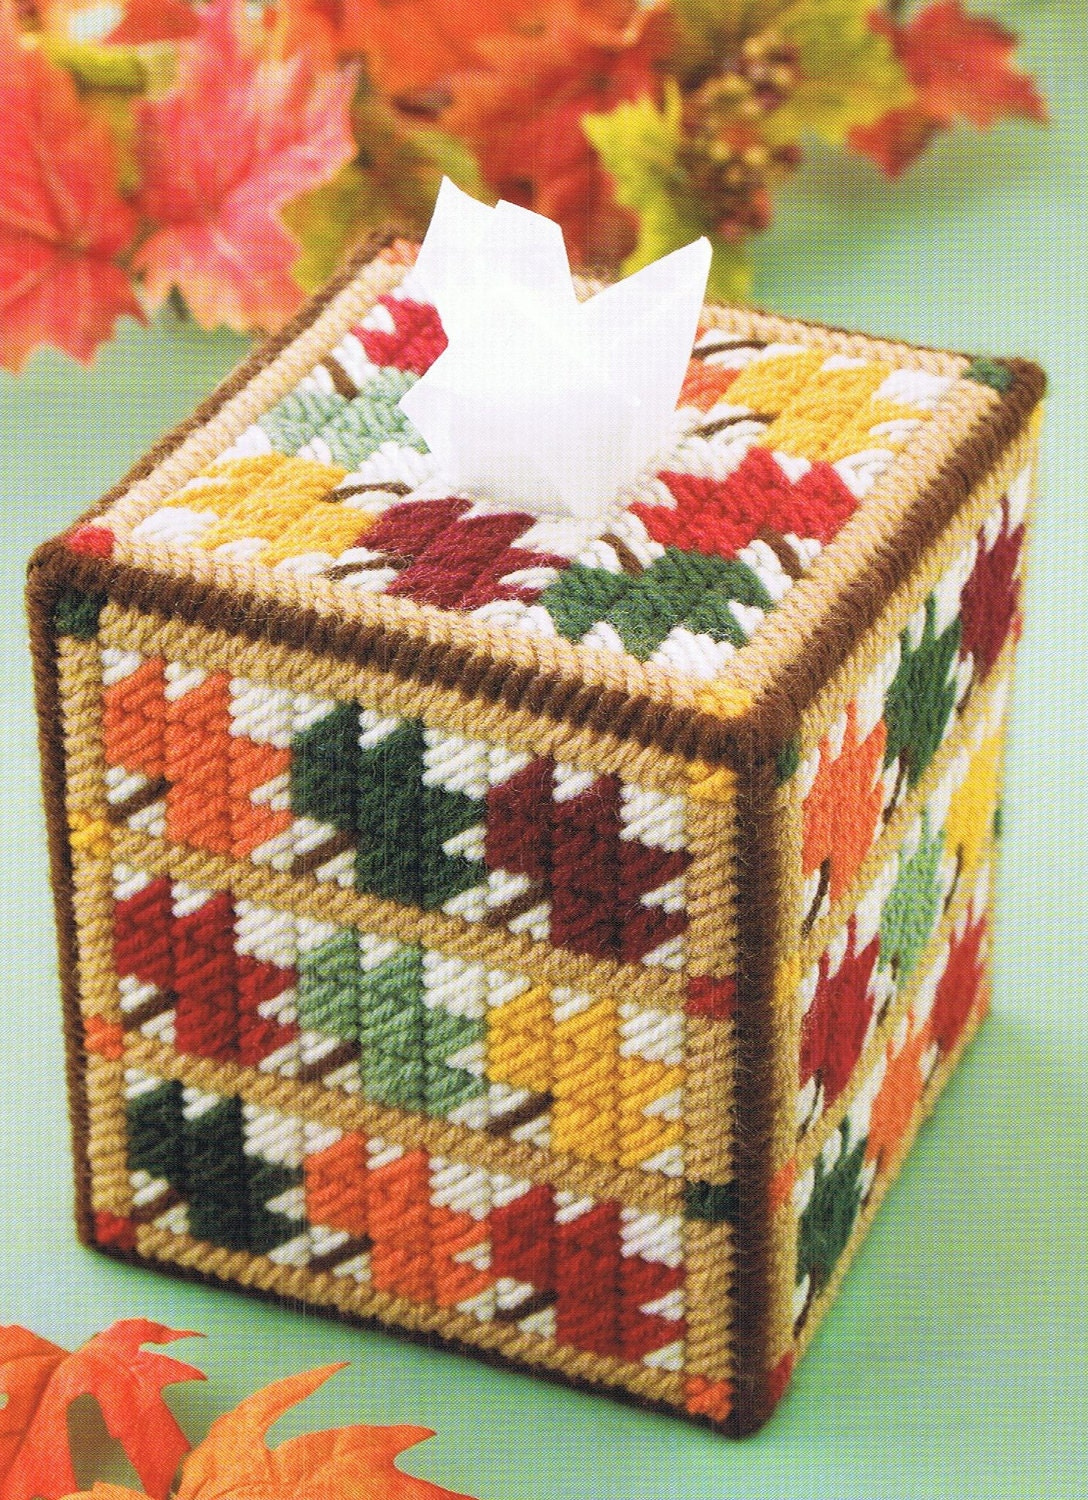 Tissue Box Plastic Canvas Patterns Free 29 Free Patterns For Plastic 